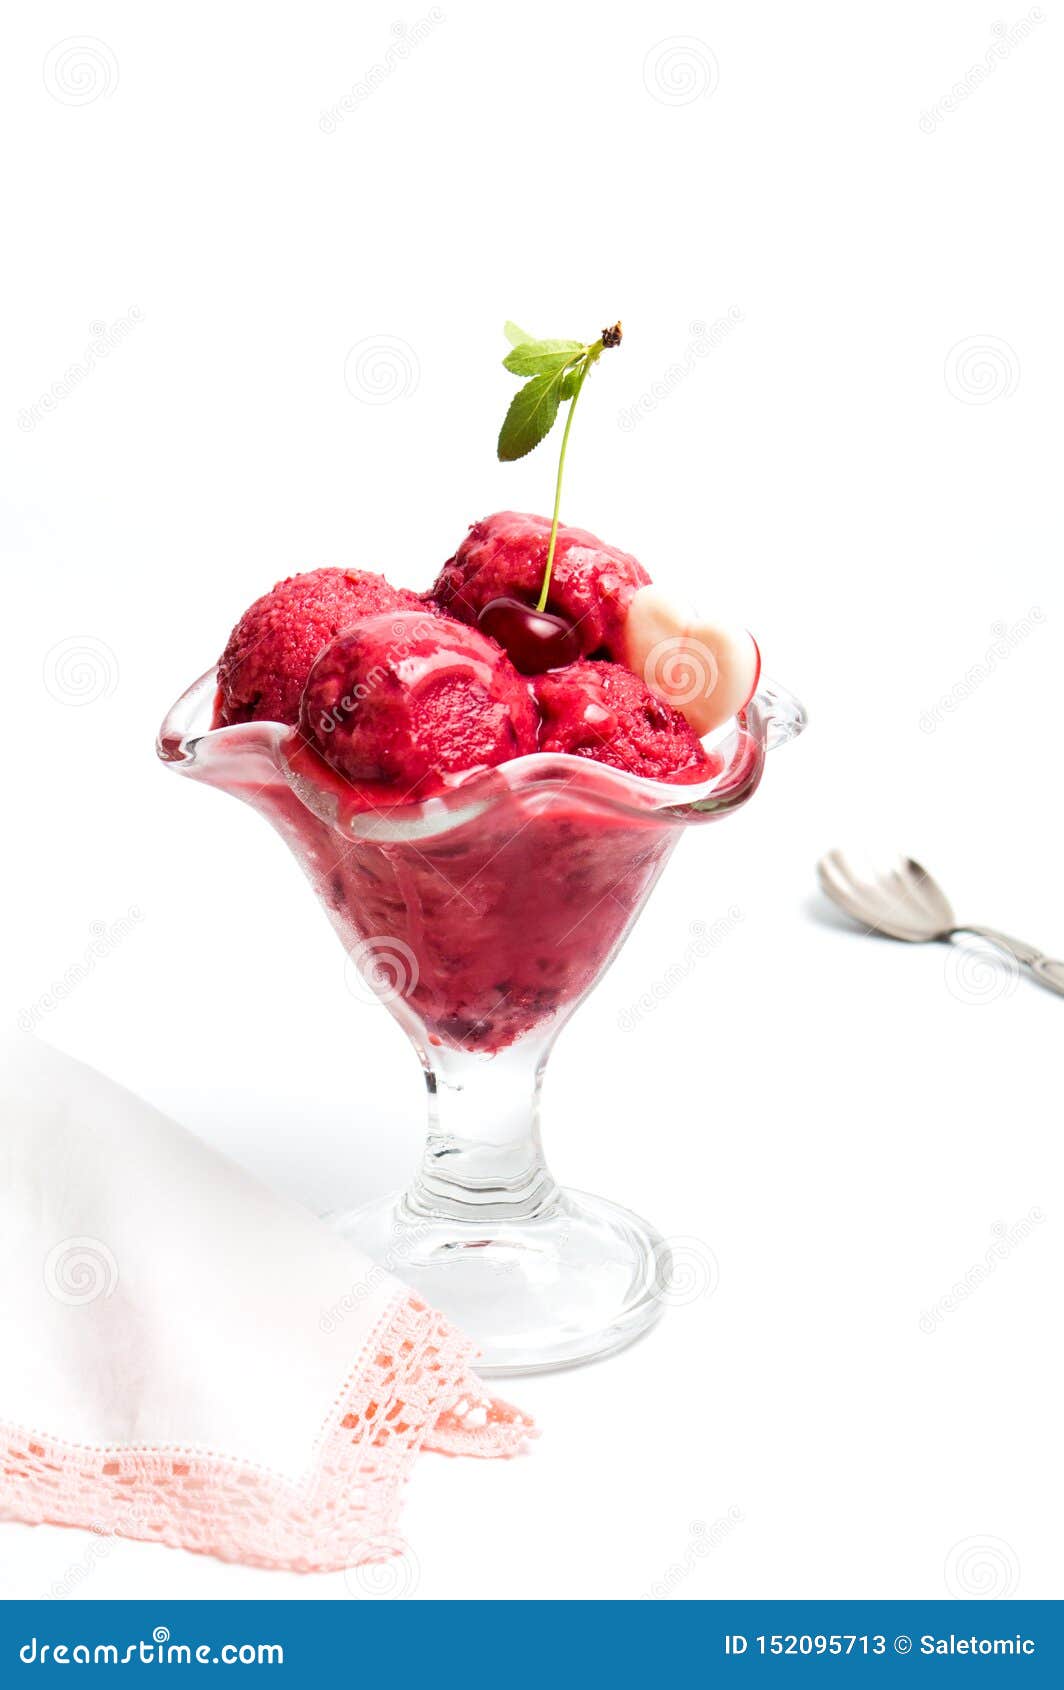 Cherry Ice Cream Scoops In A Cup Stock Image - Image of ...